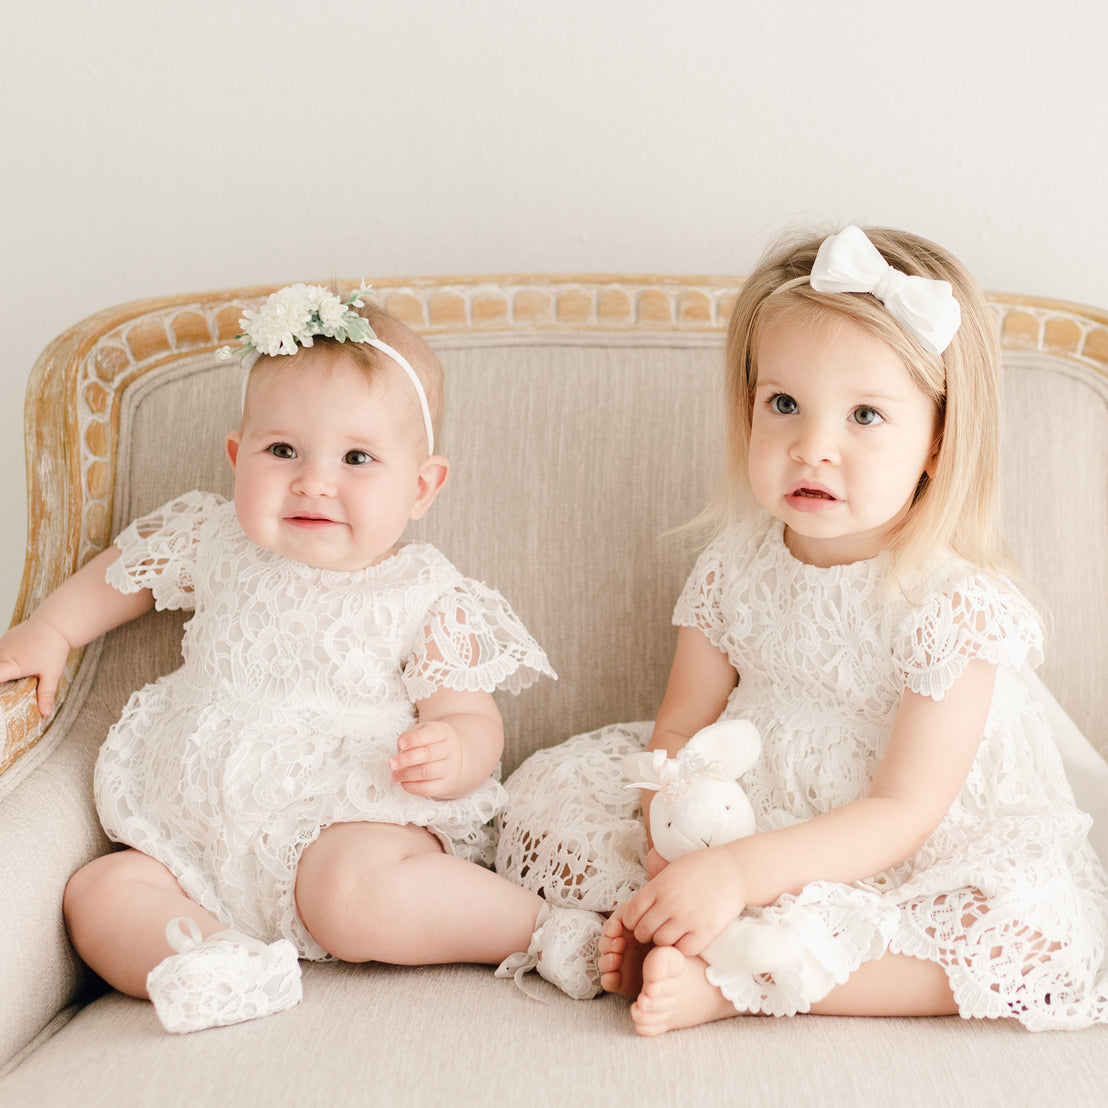 Two baby girls wearing the Lola Lace Bubble Romper. One is wearing the Lola Flower Headband and the other is wearing a White Bow Headband.